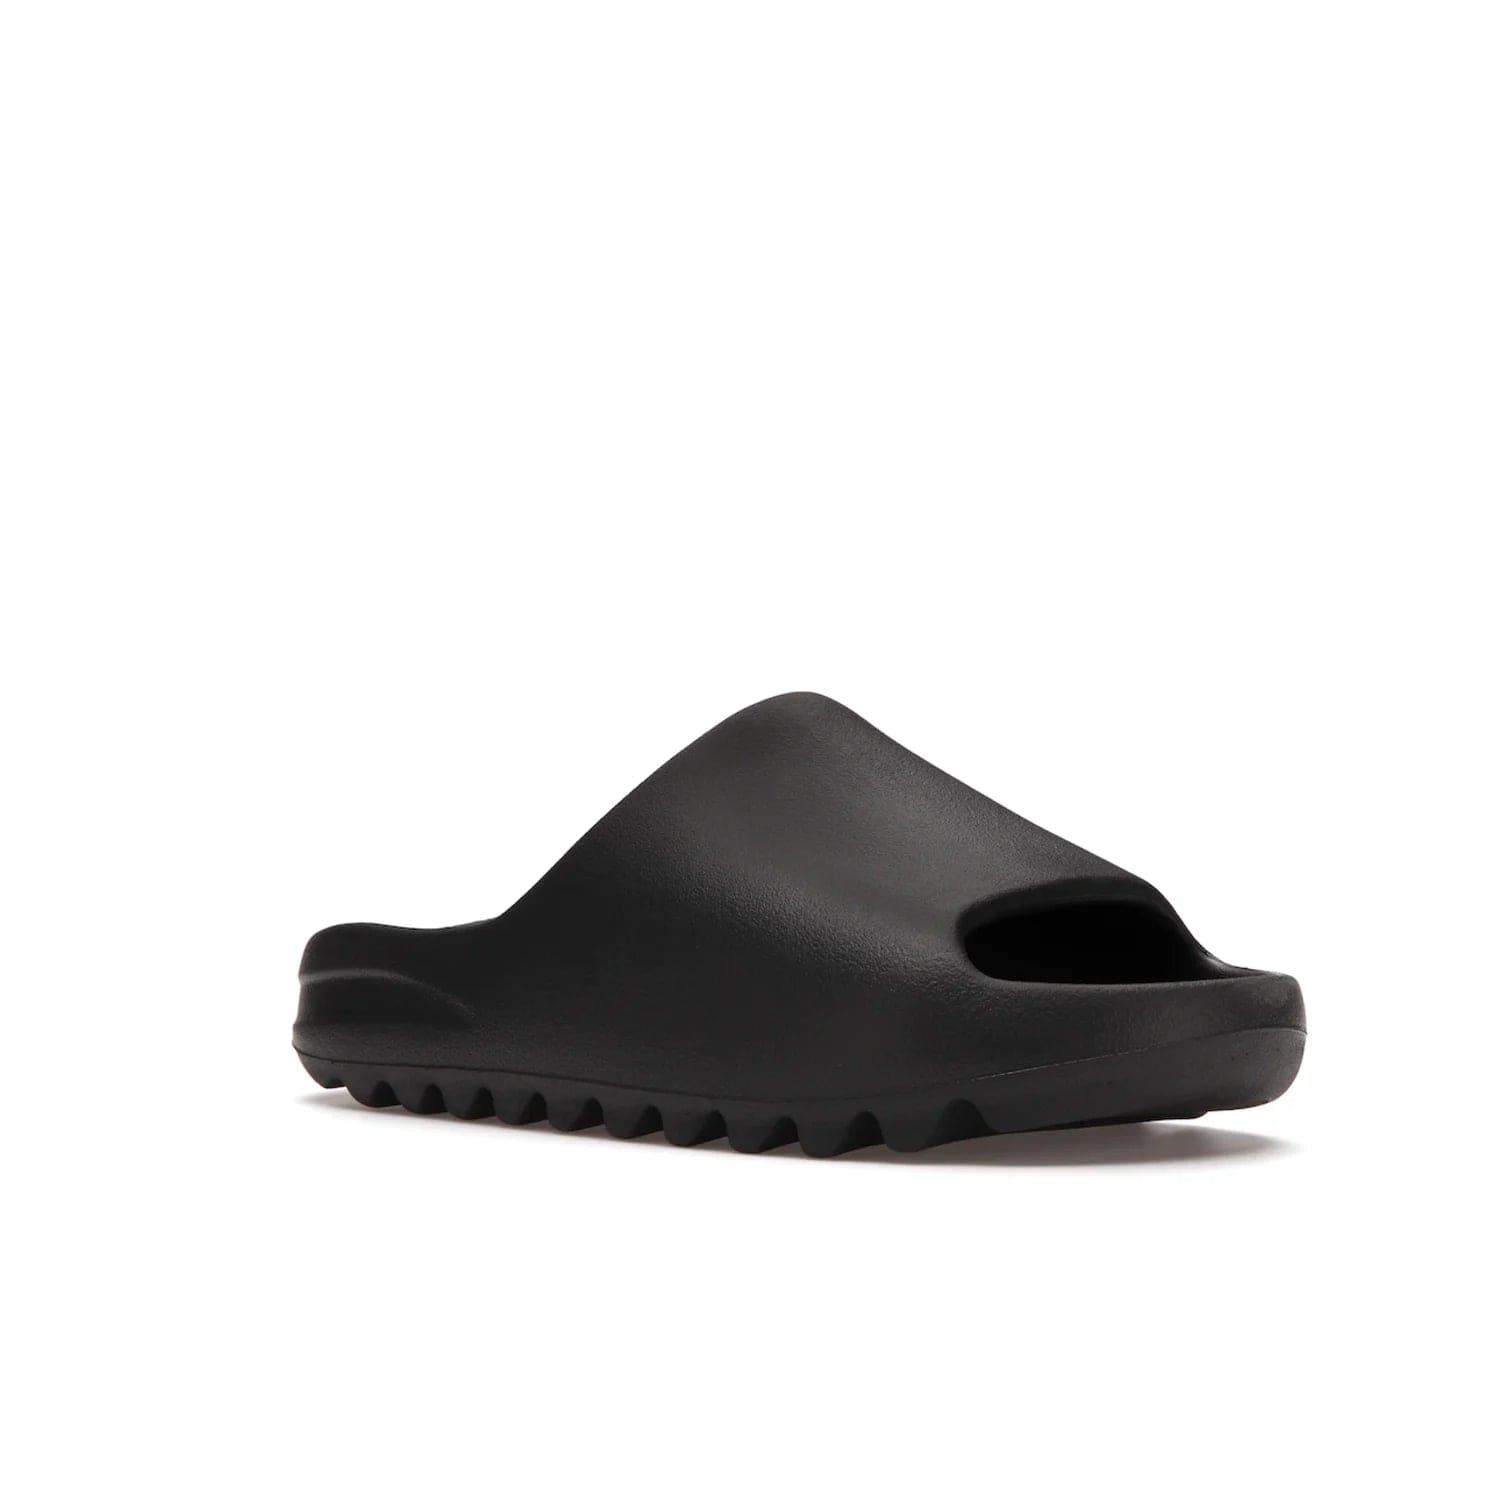 adidas Yeezy Slide Onyx - Image 5 - Only at www.BallersClubKickz.com - Step into comfort and style with the adidas Yeezy Slide Onyx. Featuring foam construction, an all-black colorway and a grooved outsole for stability and responsiveness, this versatile slide is a must-have for your collection.